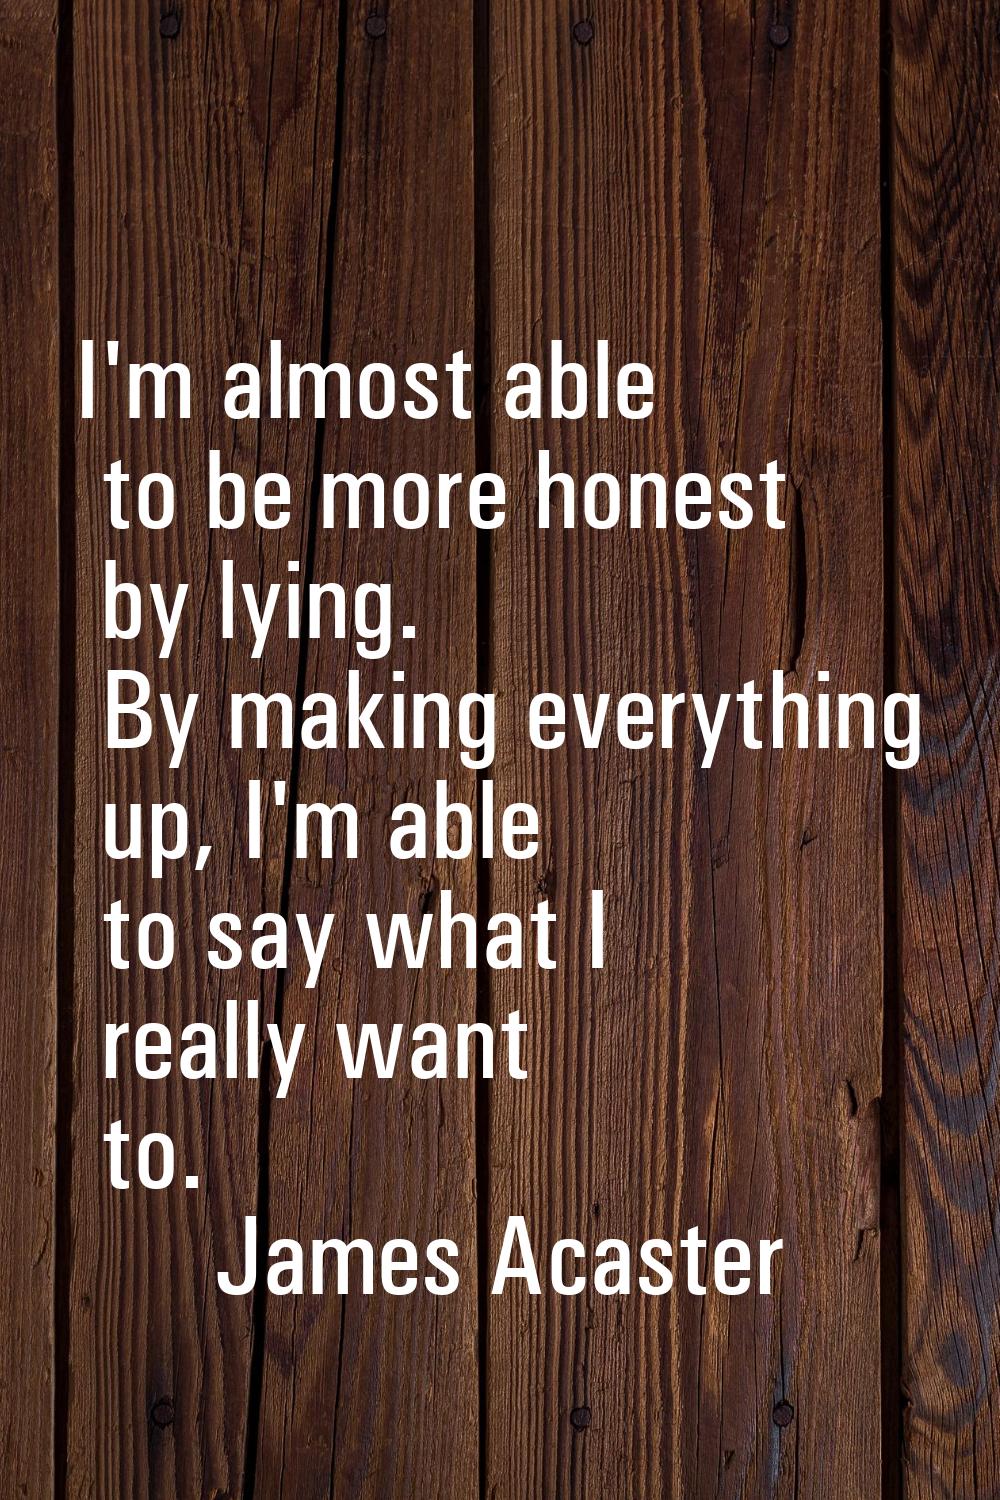 I'm almost able to be more honest by lying. By making everything up, I'm able to say what I really 